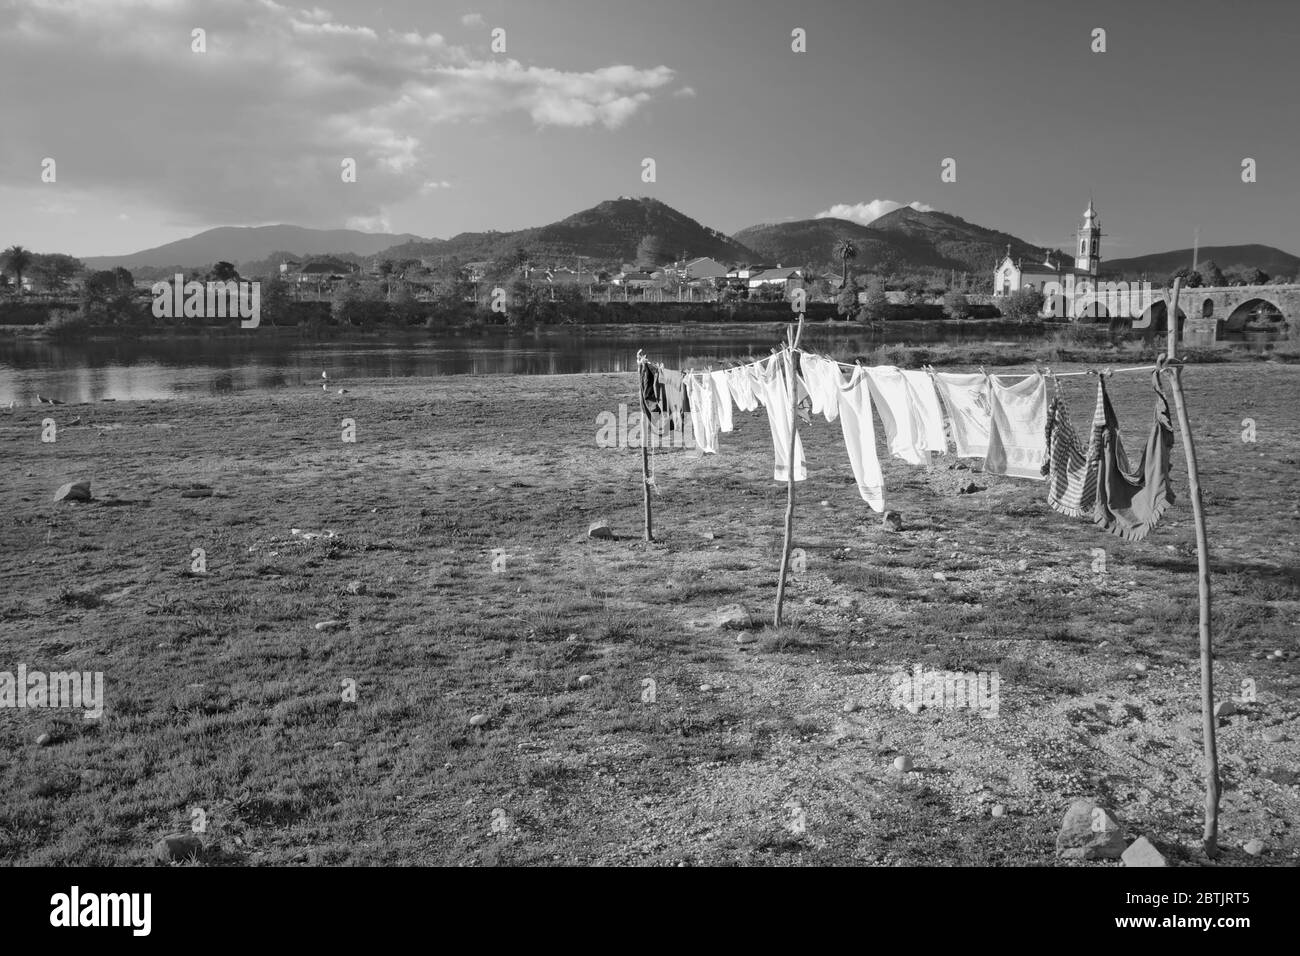 Black and white rural landscape with clothes drying in the foreground, next to the river Lima, Ponte de Lima, northern Portugal Stock Photo